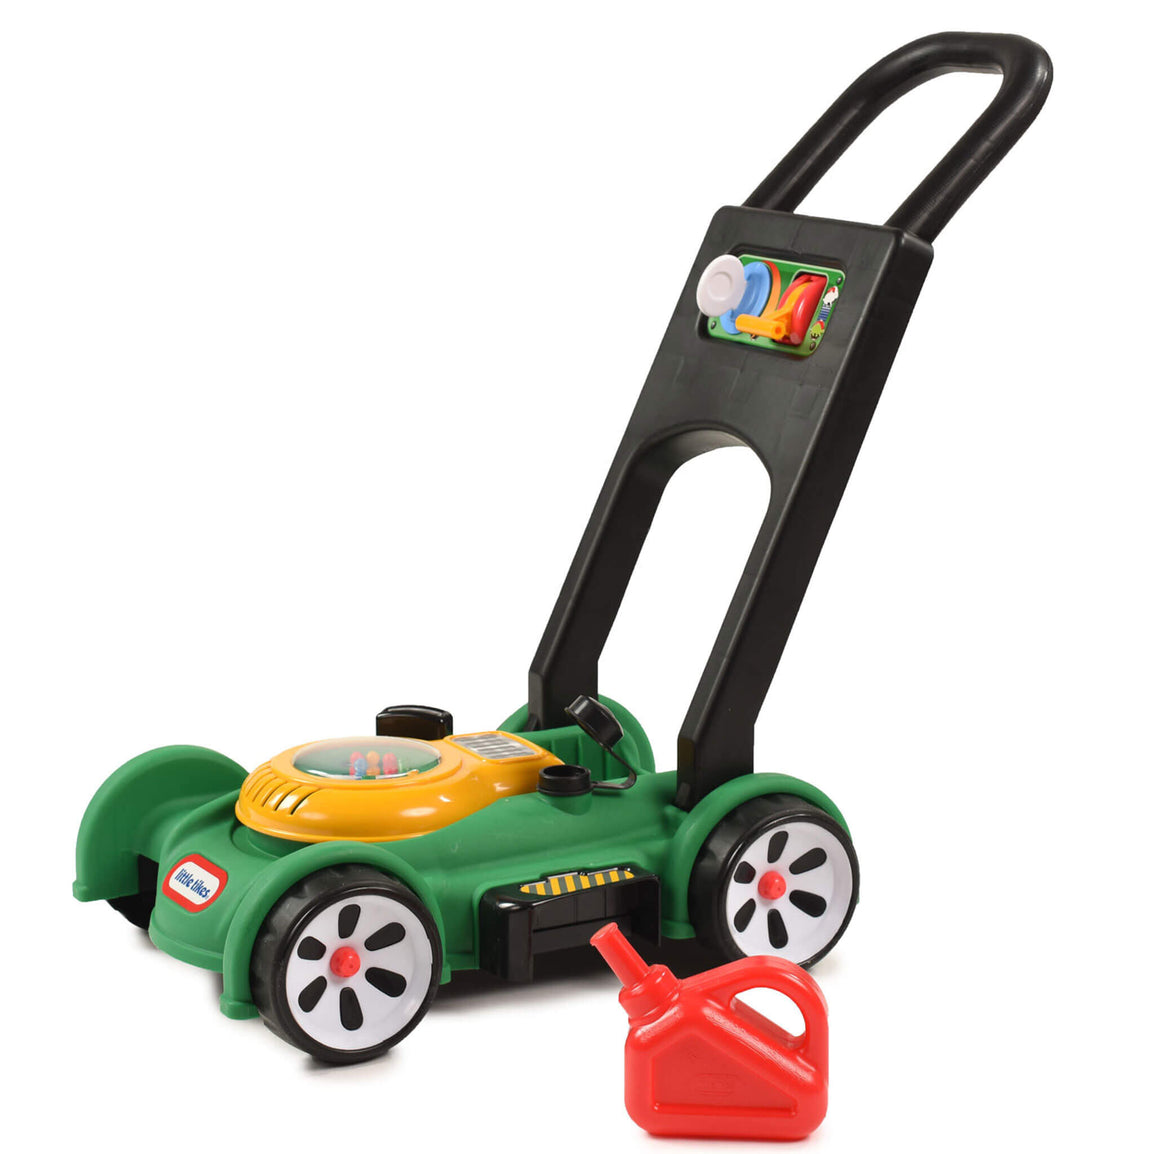 Green toy lawn mower with gas can